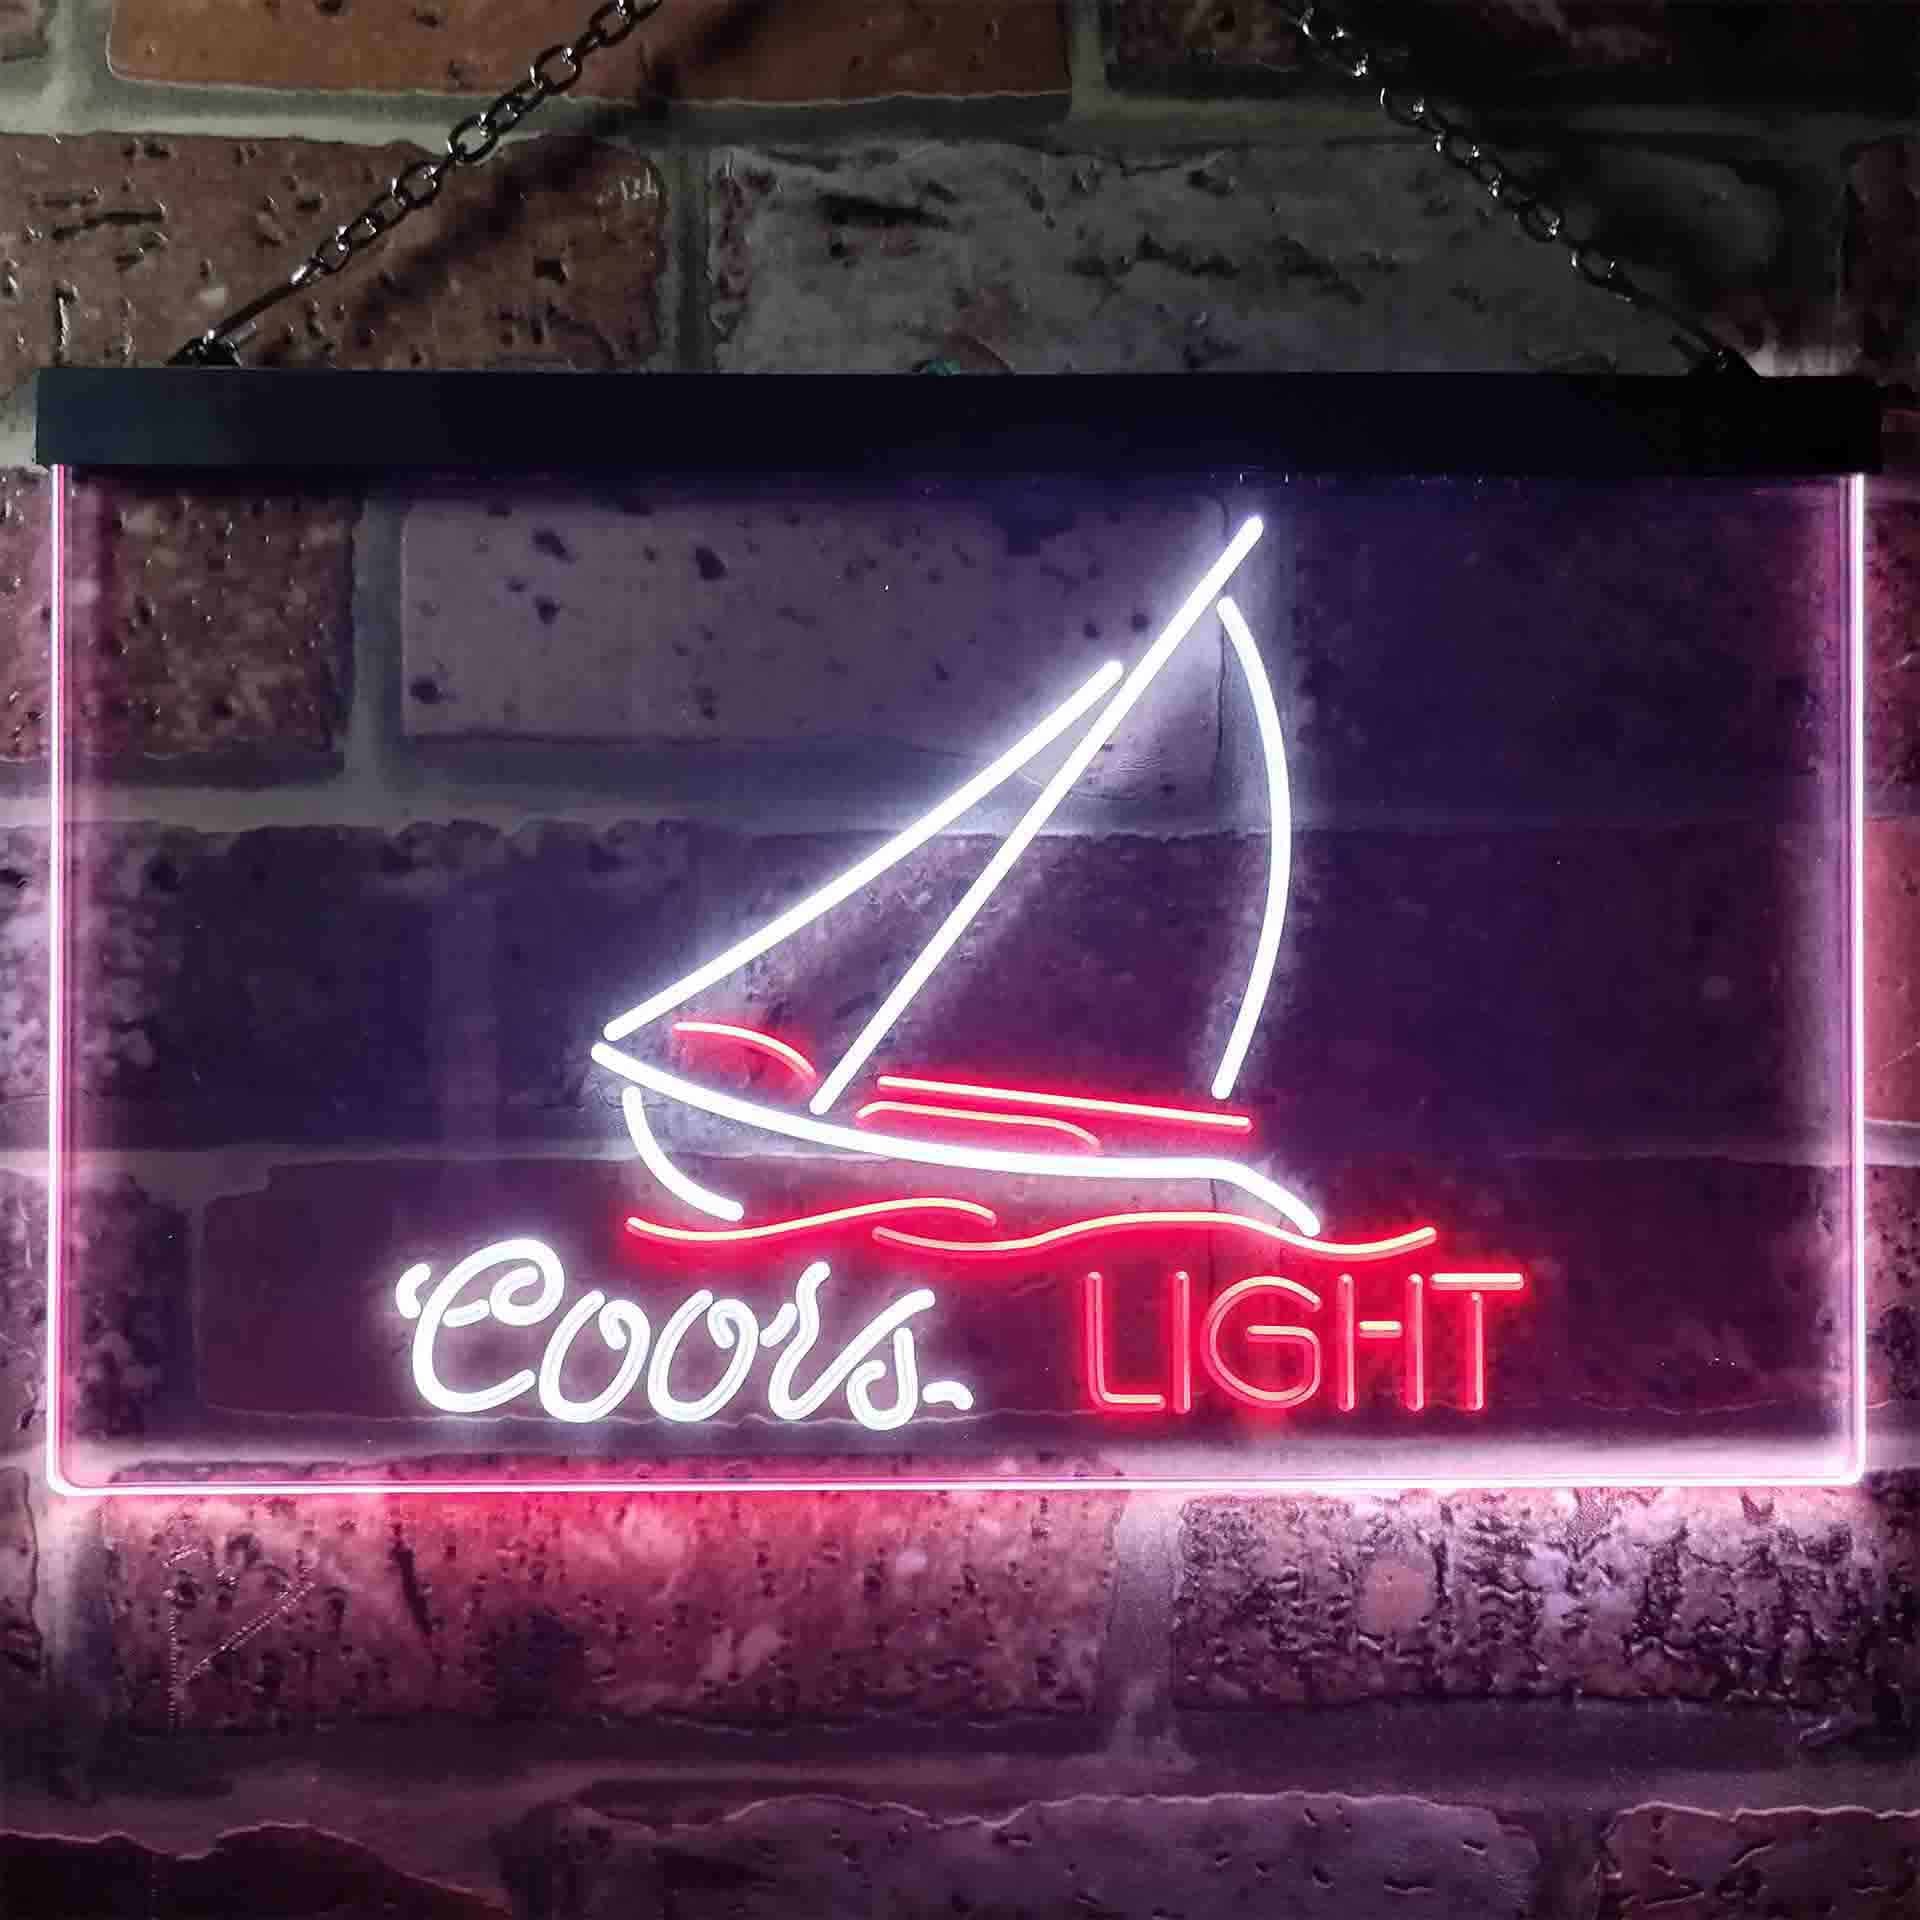 Coors Light Sailboat LED Neon Sign